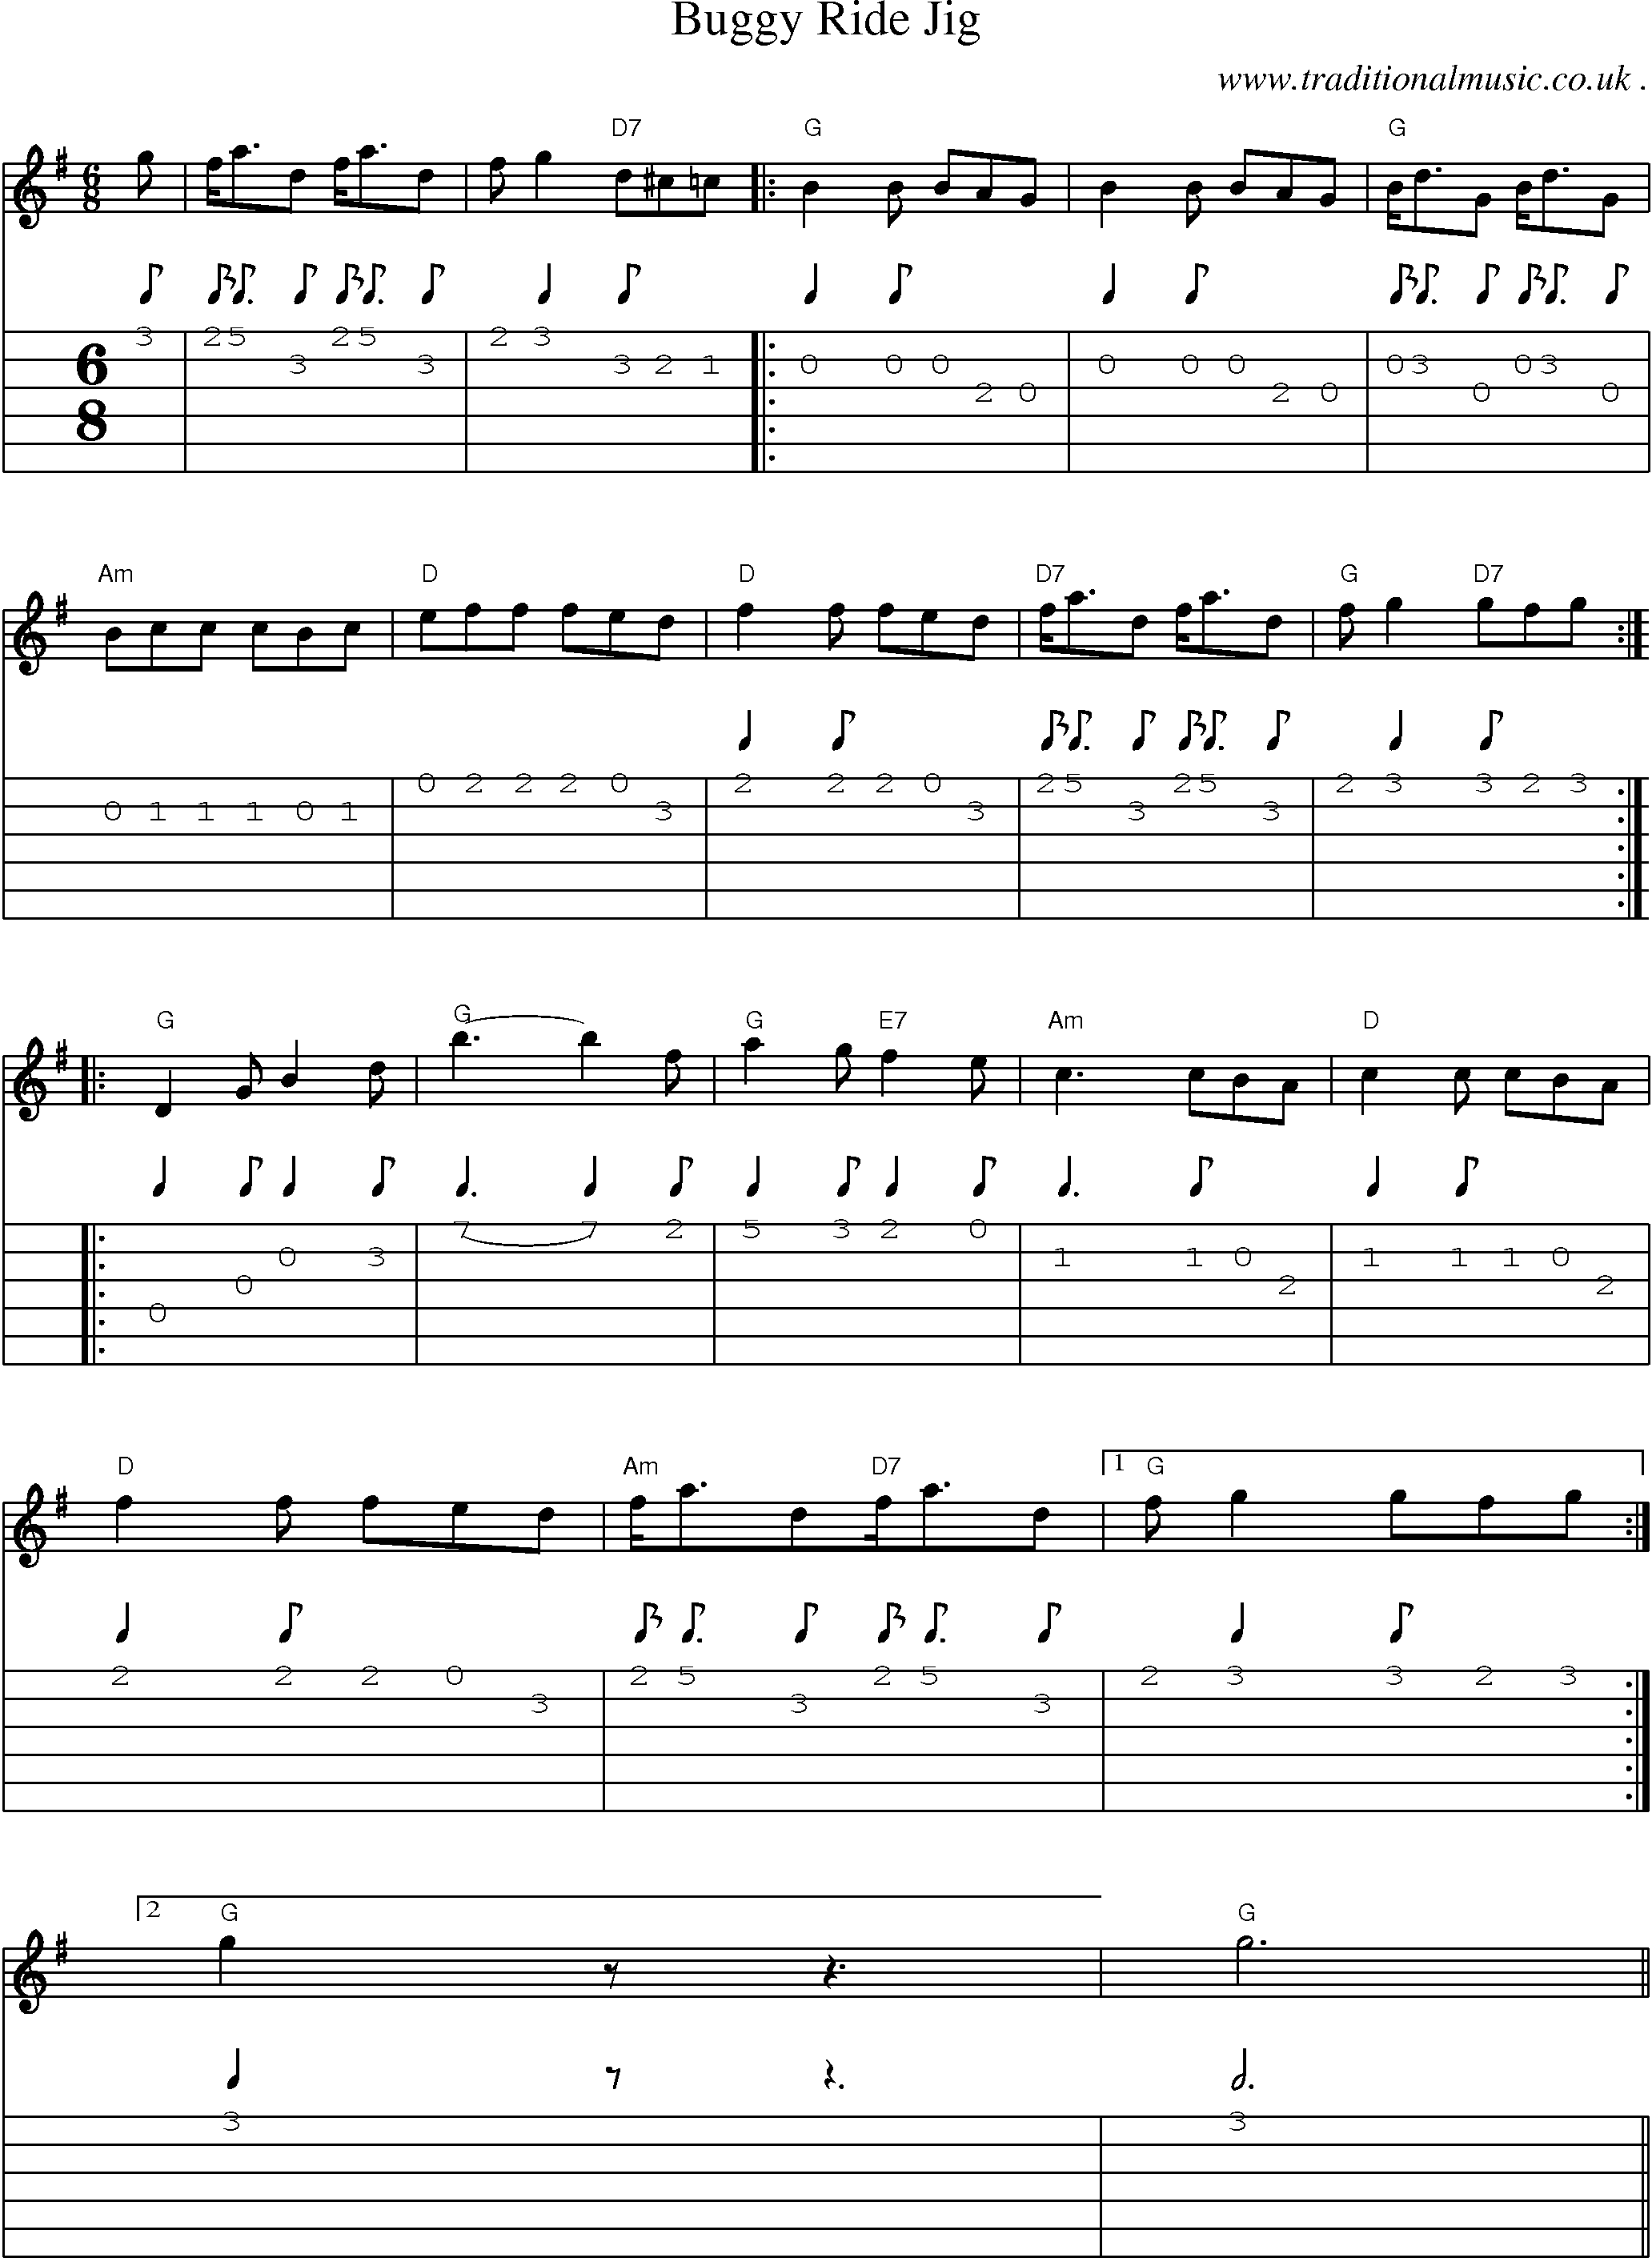 Sheet-Music and Guitar Tabs for Buggy Ride Jig